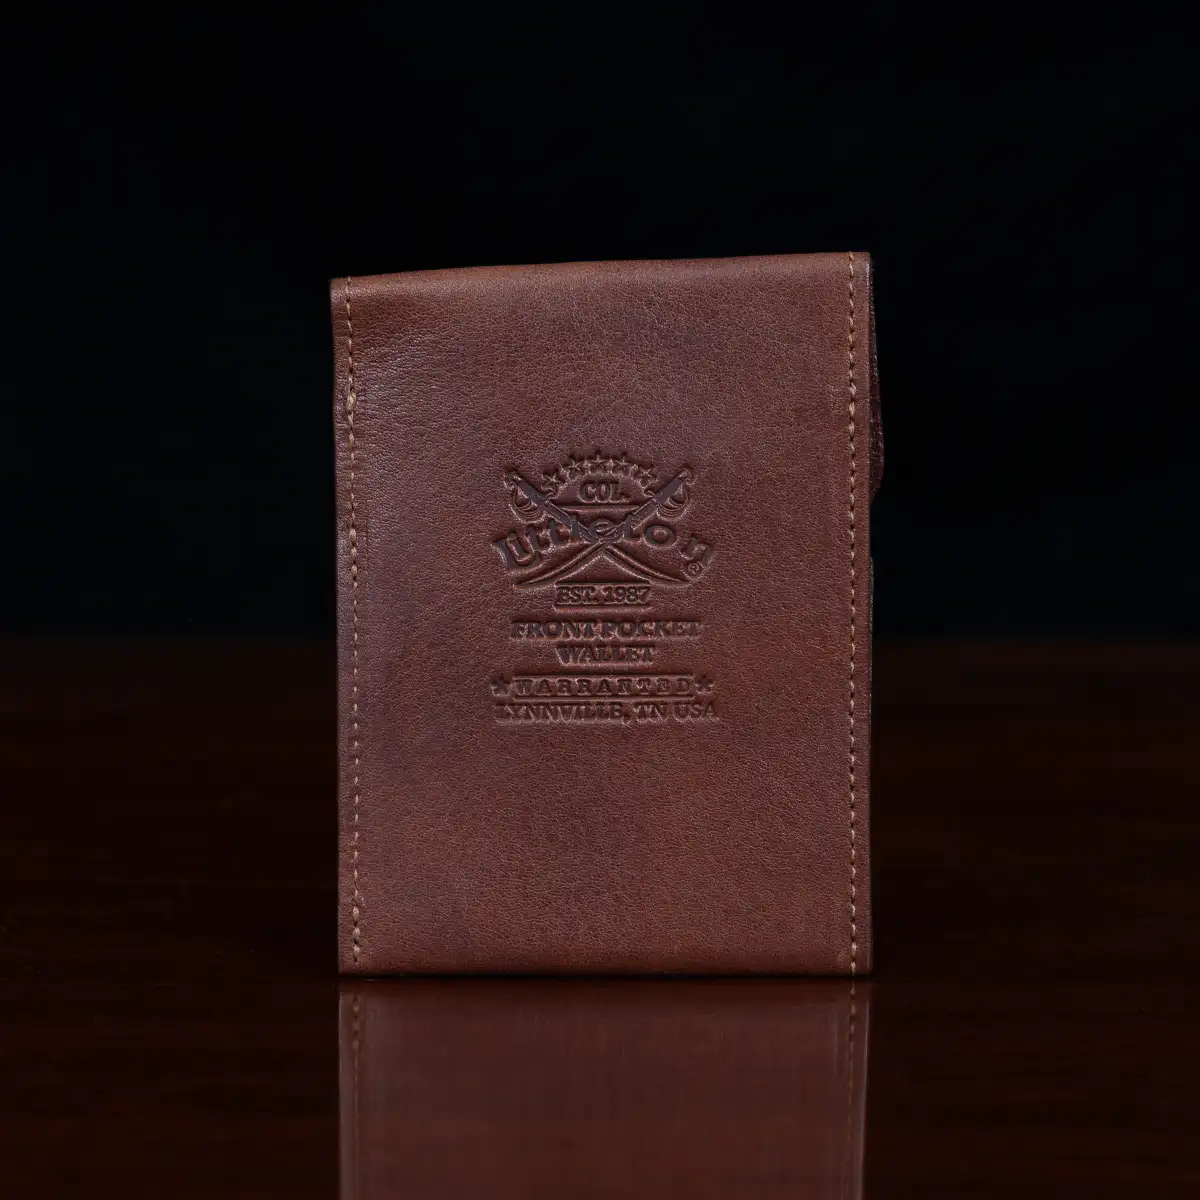 Black Genuine Leather Wallet Without Any Logos or Markings